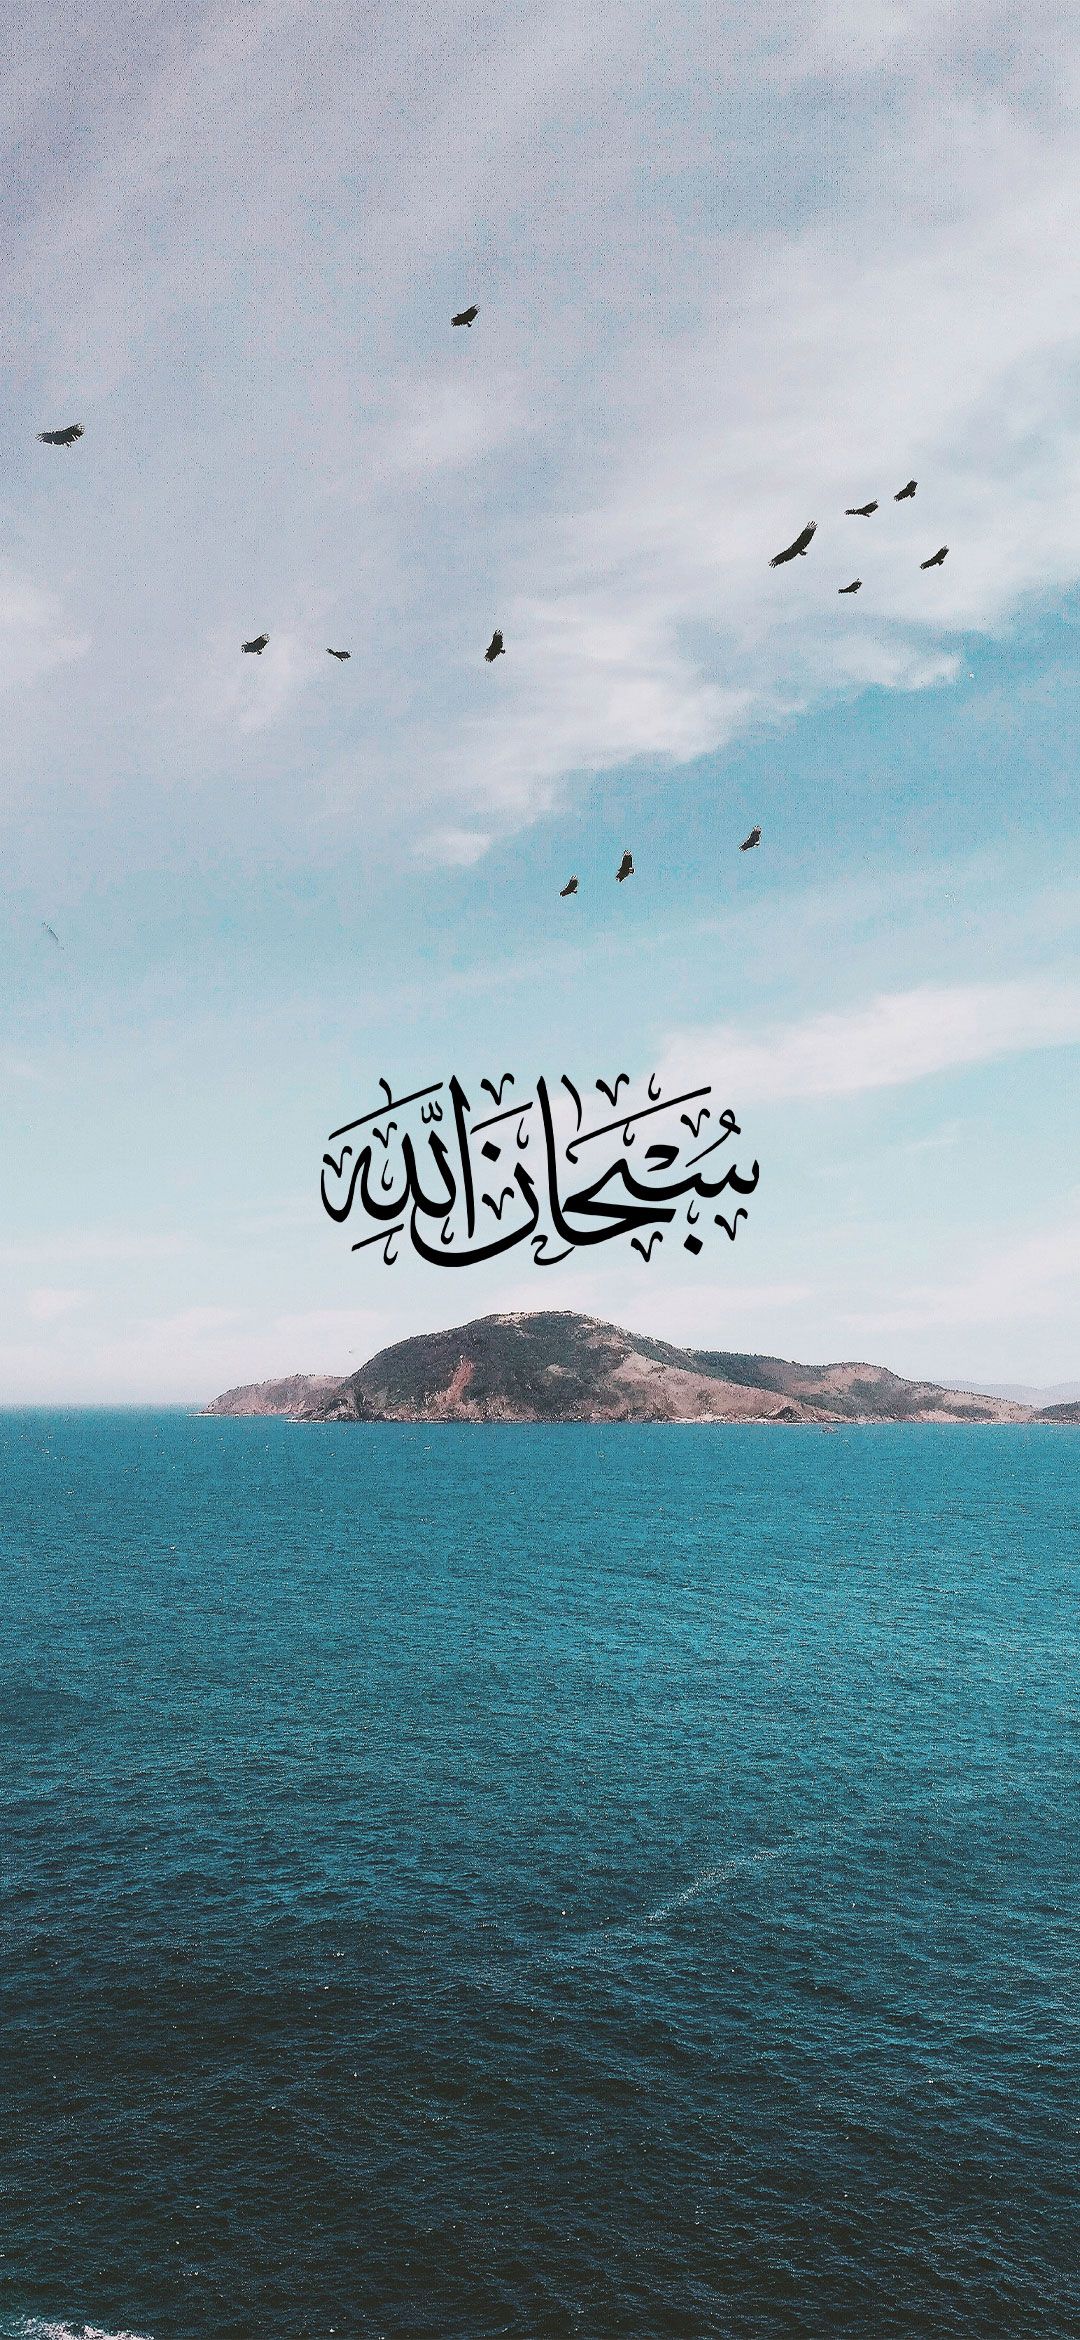 20 Excellent wallpaper aesthetic allah You Can Download It free